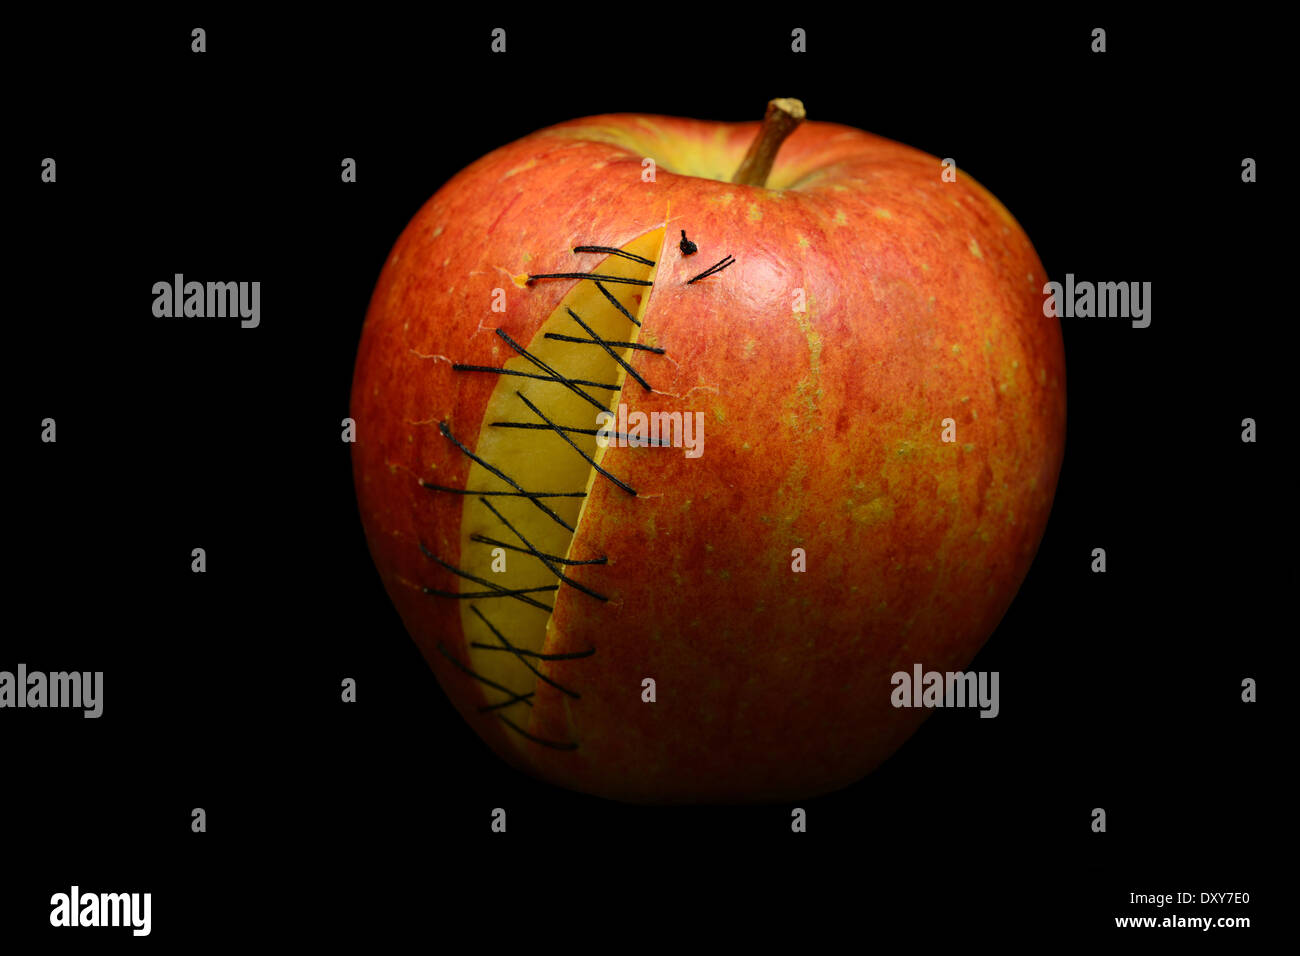 Red apple with scars on black background Stock Photo